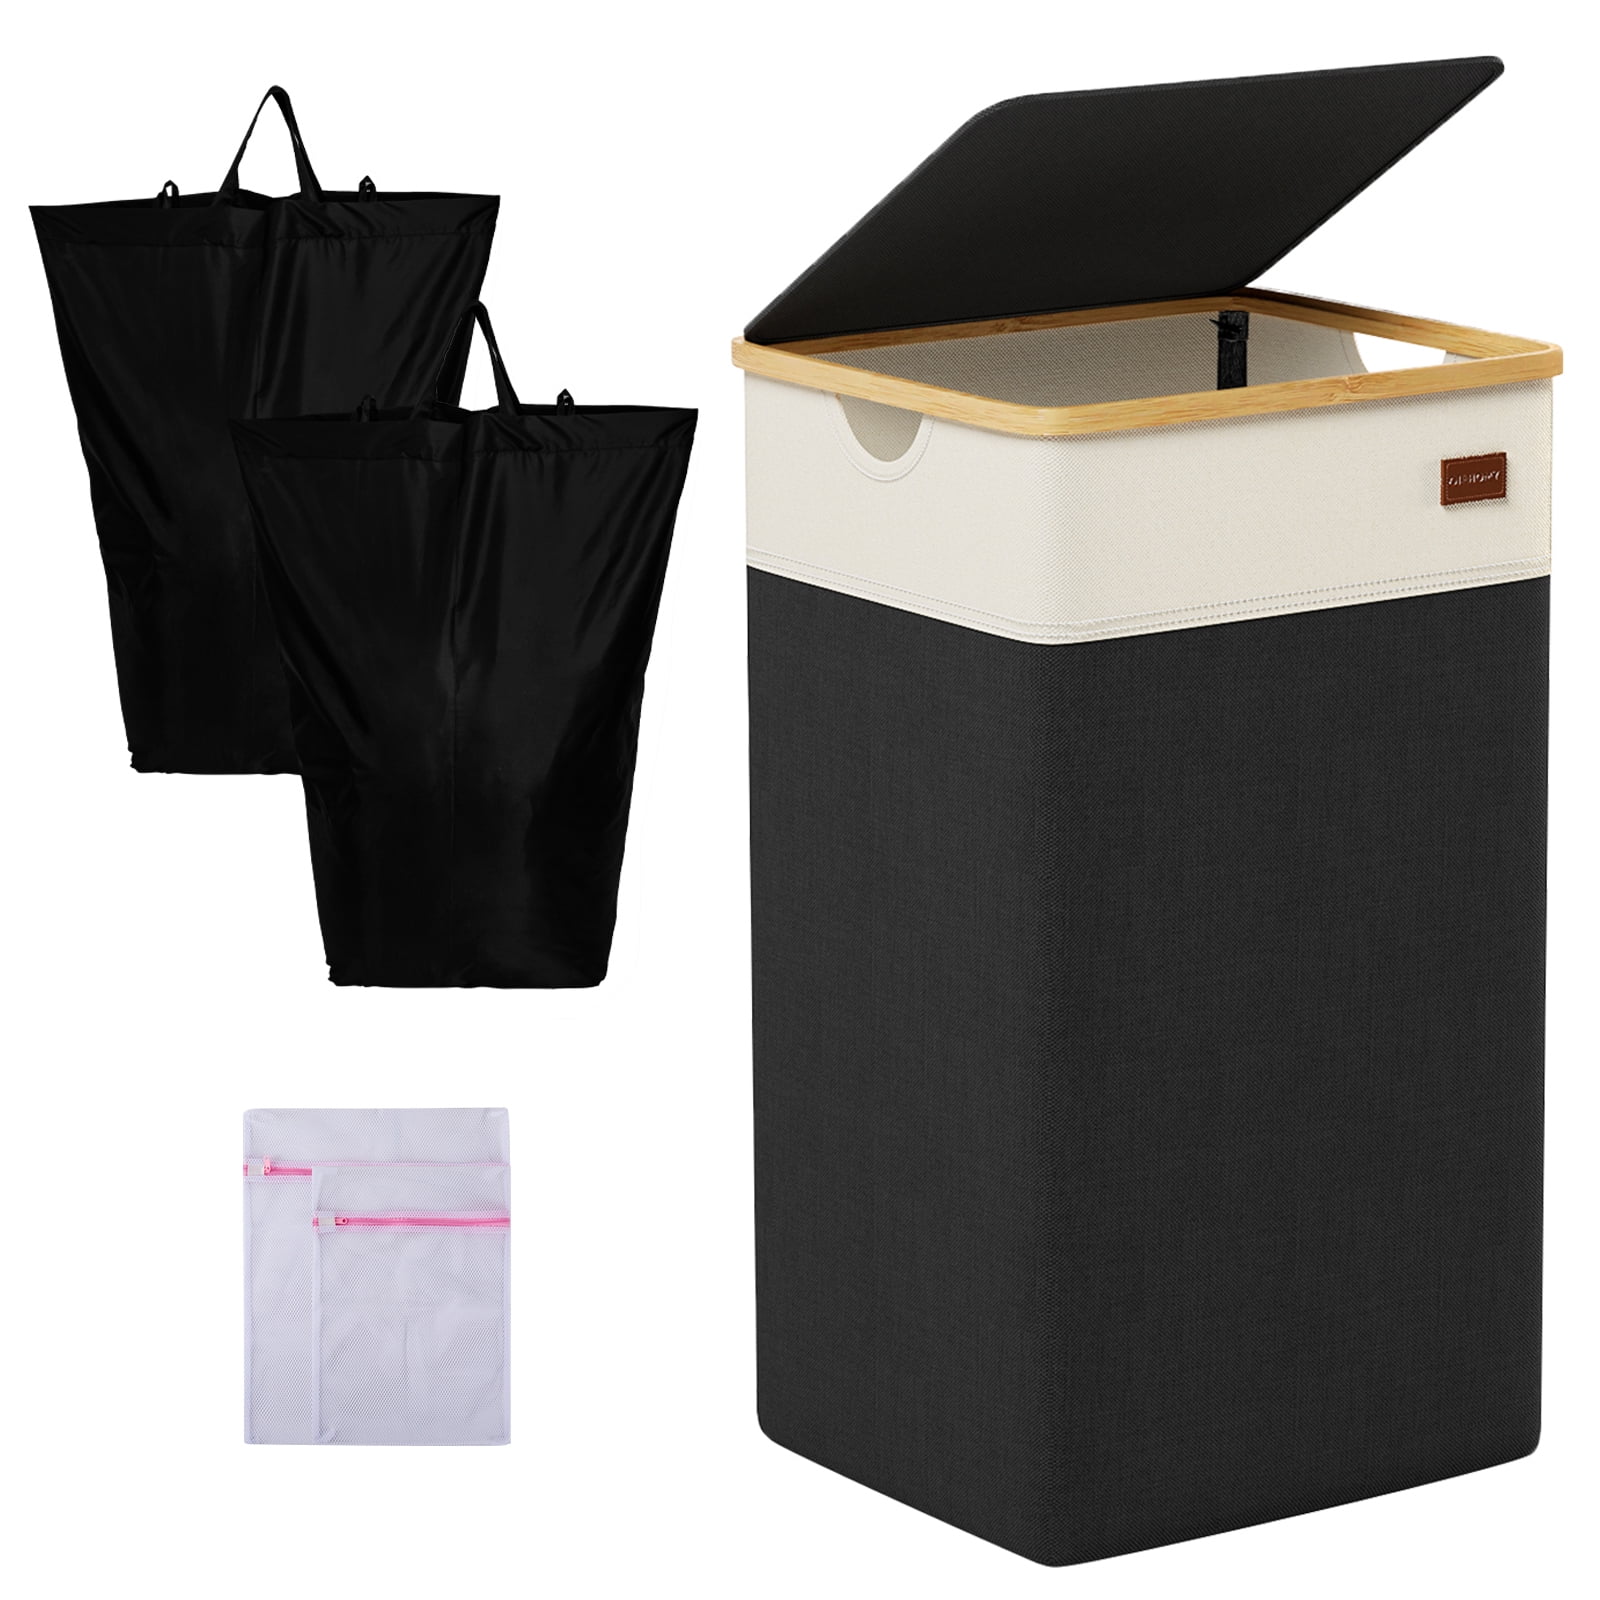 CHERISHGARD 100L laundry hamper with lid, Tall Laundry Basket with ...